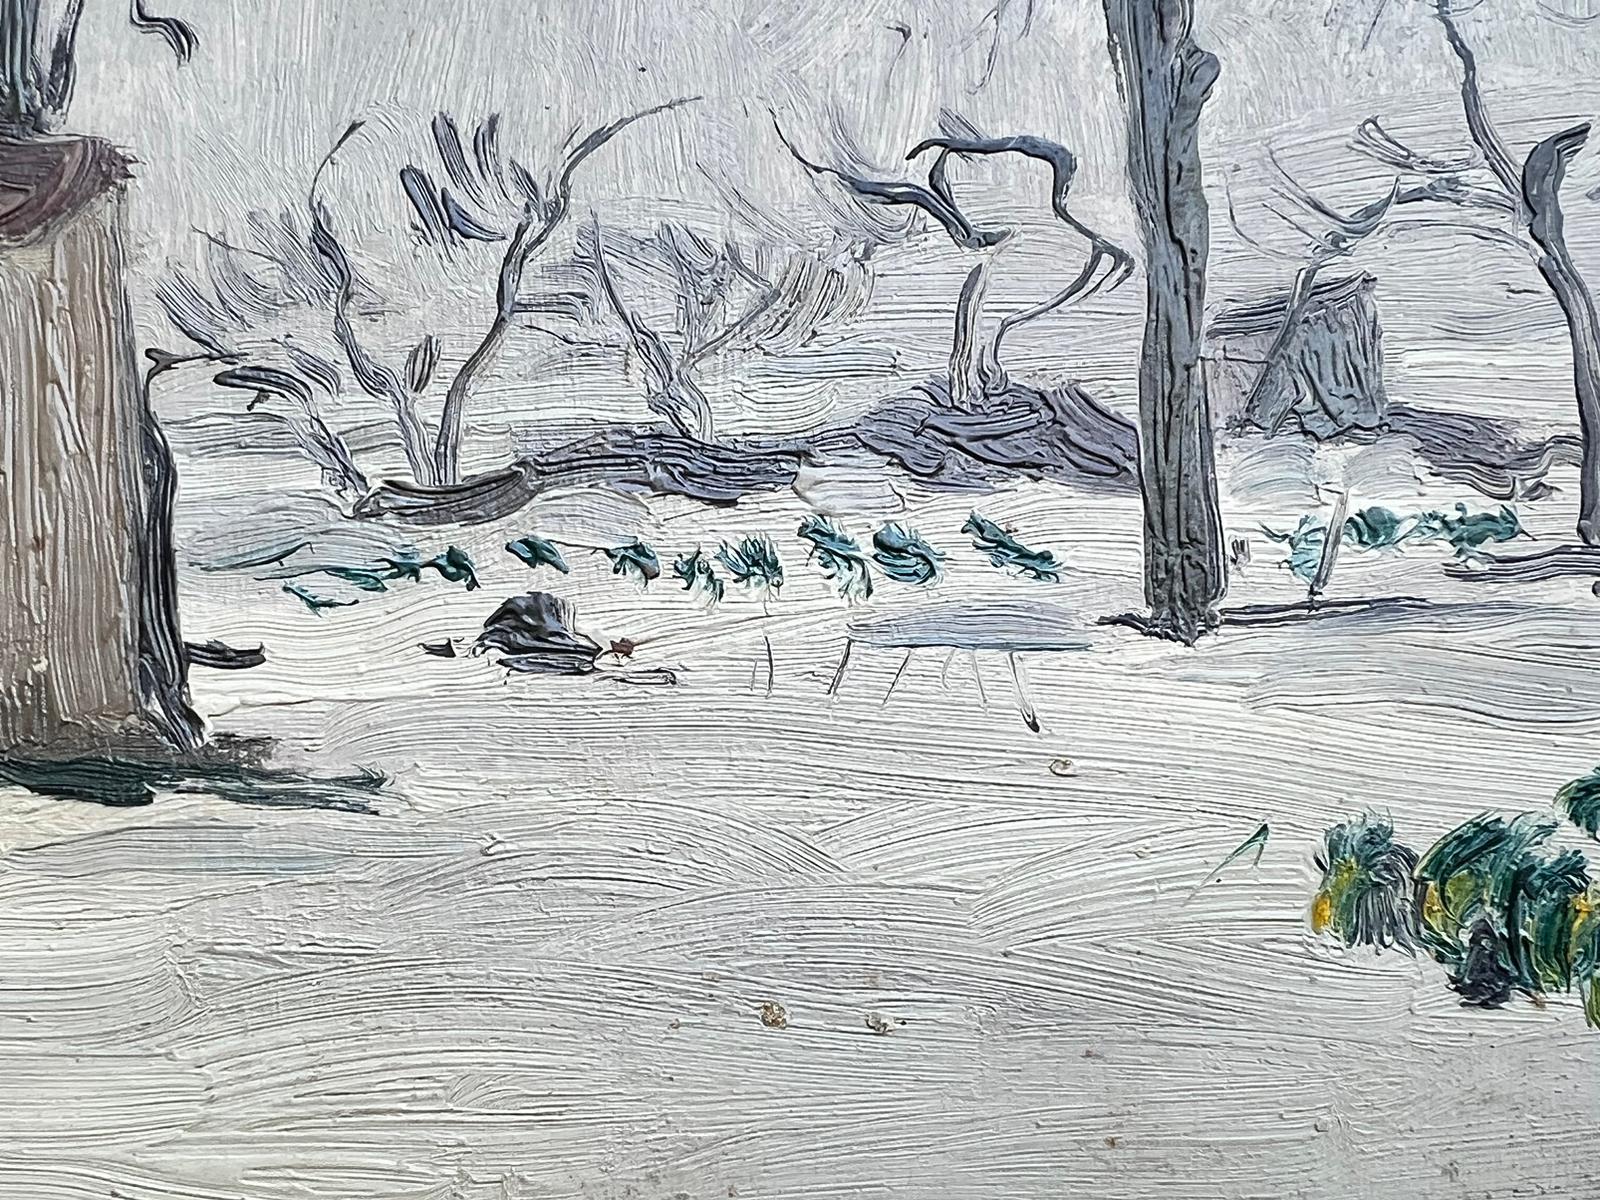 Winter
by MIGUEL TUSQUELLAS CORBELLA (Spanish, 1884-1969)
signed - and painted on artists studio stamped board
oil painting on board, unframed
board: 5.5 x 8.5 inches
provenance: private collection, France
condition: good and sound condition 
